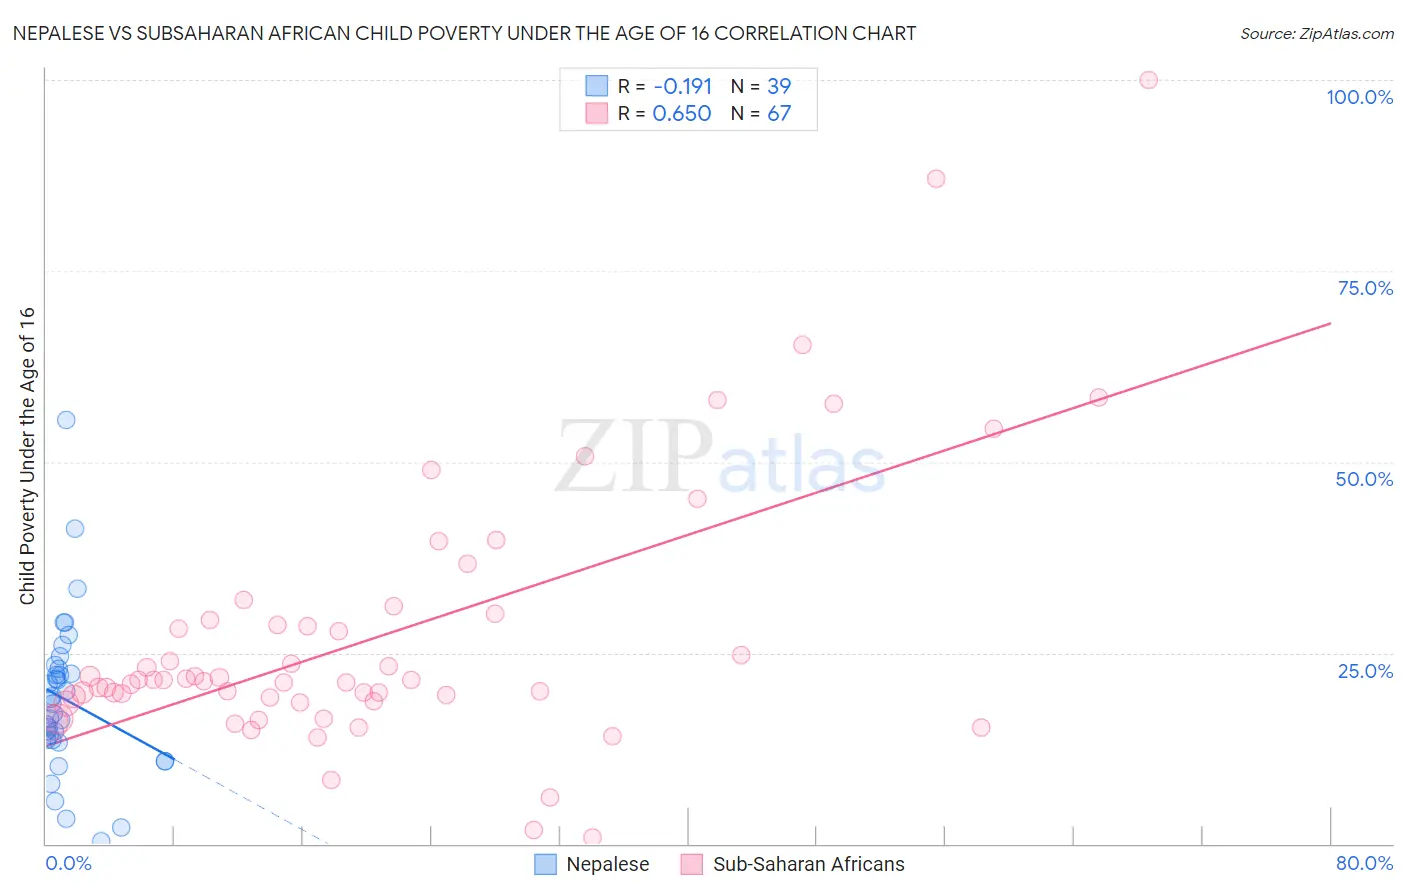 Nepalese vs Subsaharan African Child Poverty Under the Age of 16